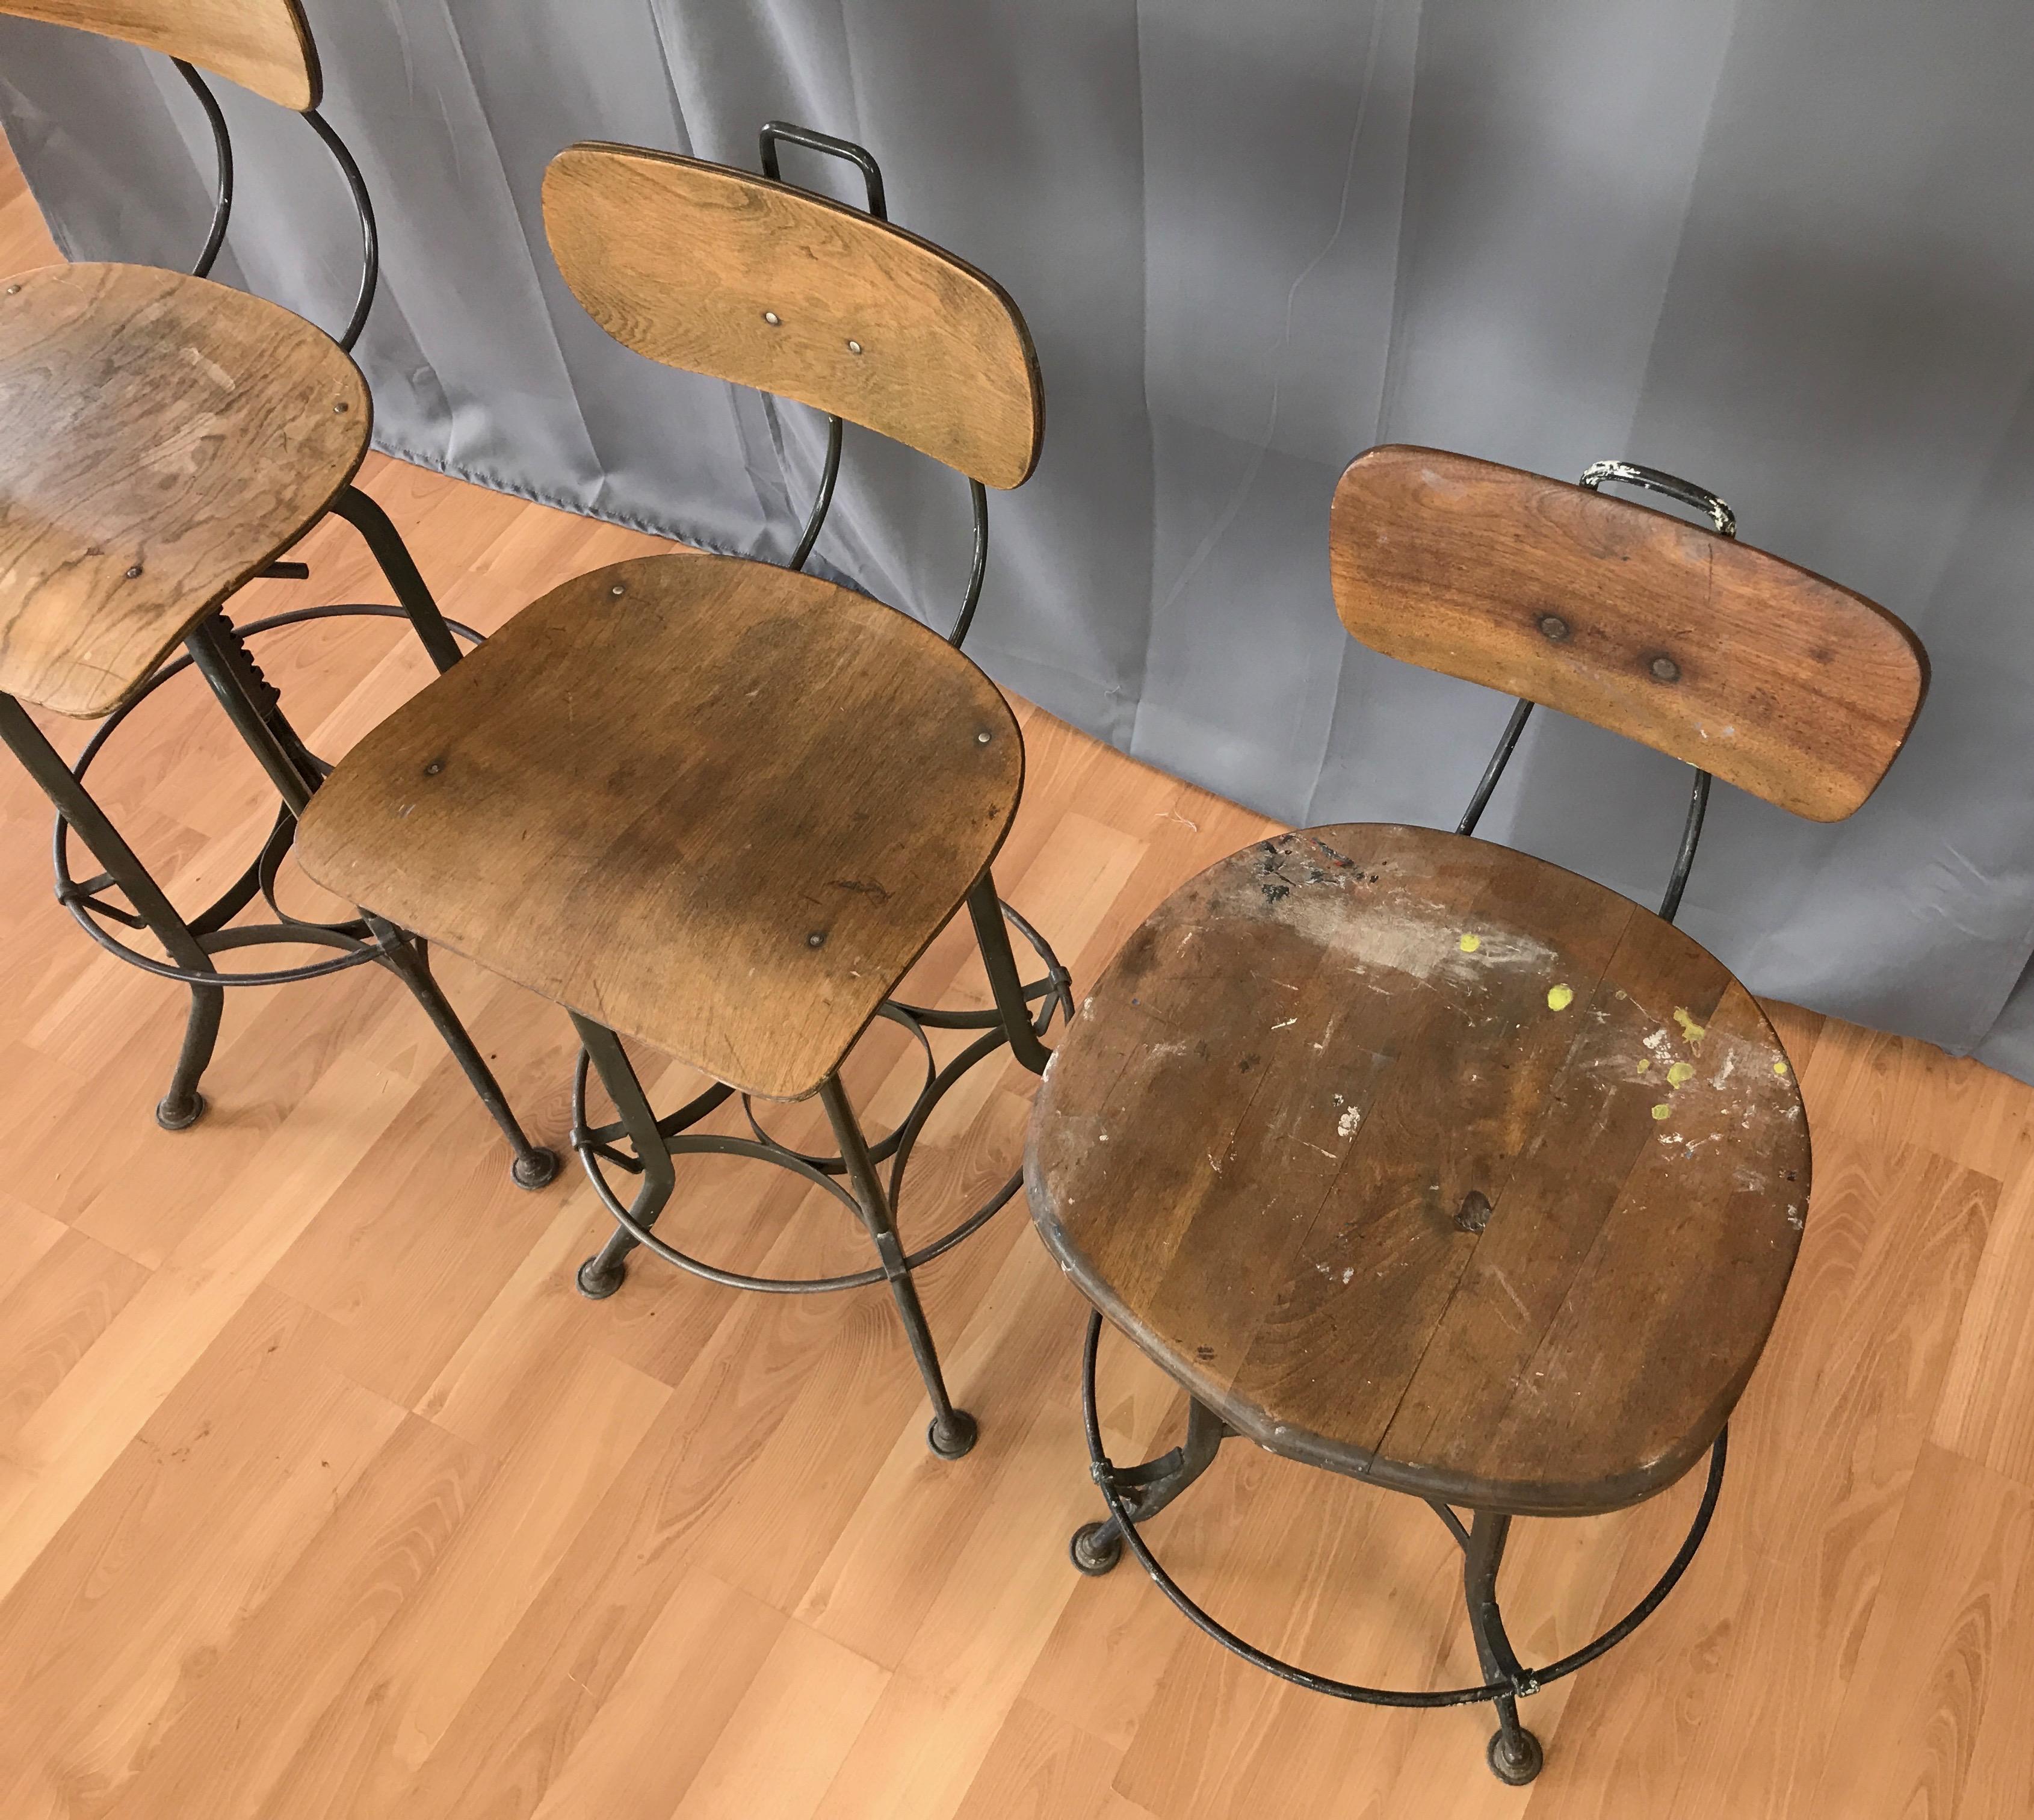 Wood Toledo Industrial Adjustable Height Swivel Stools with Backs, Two Available